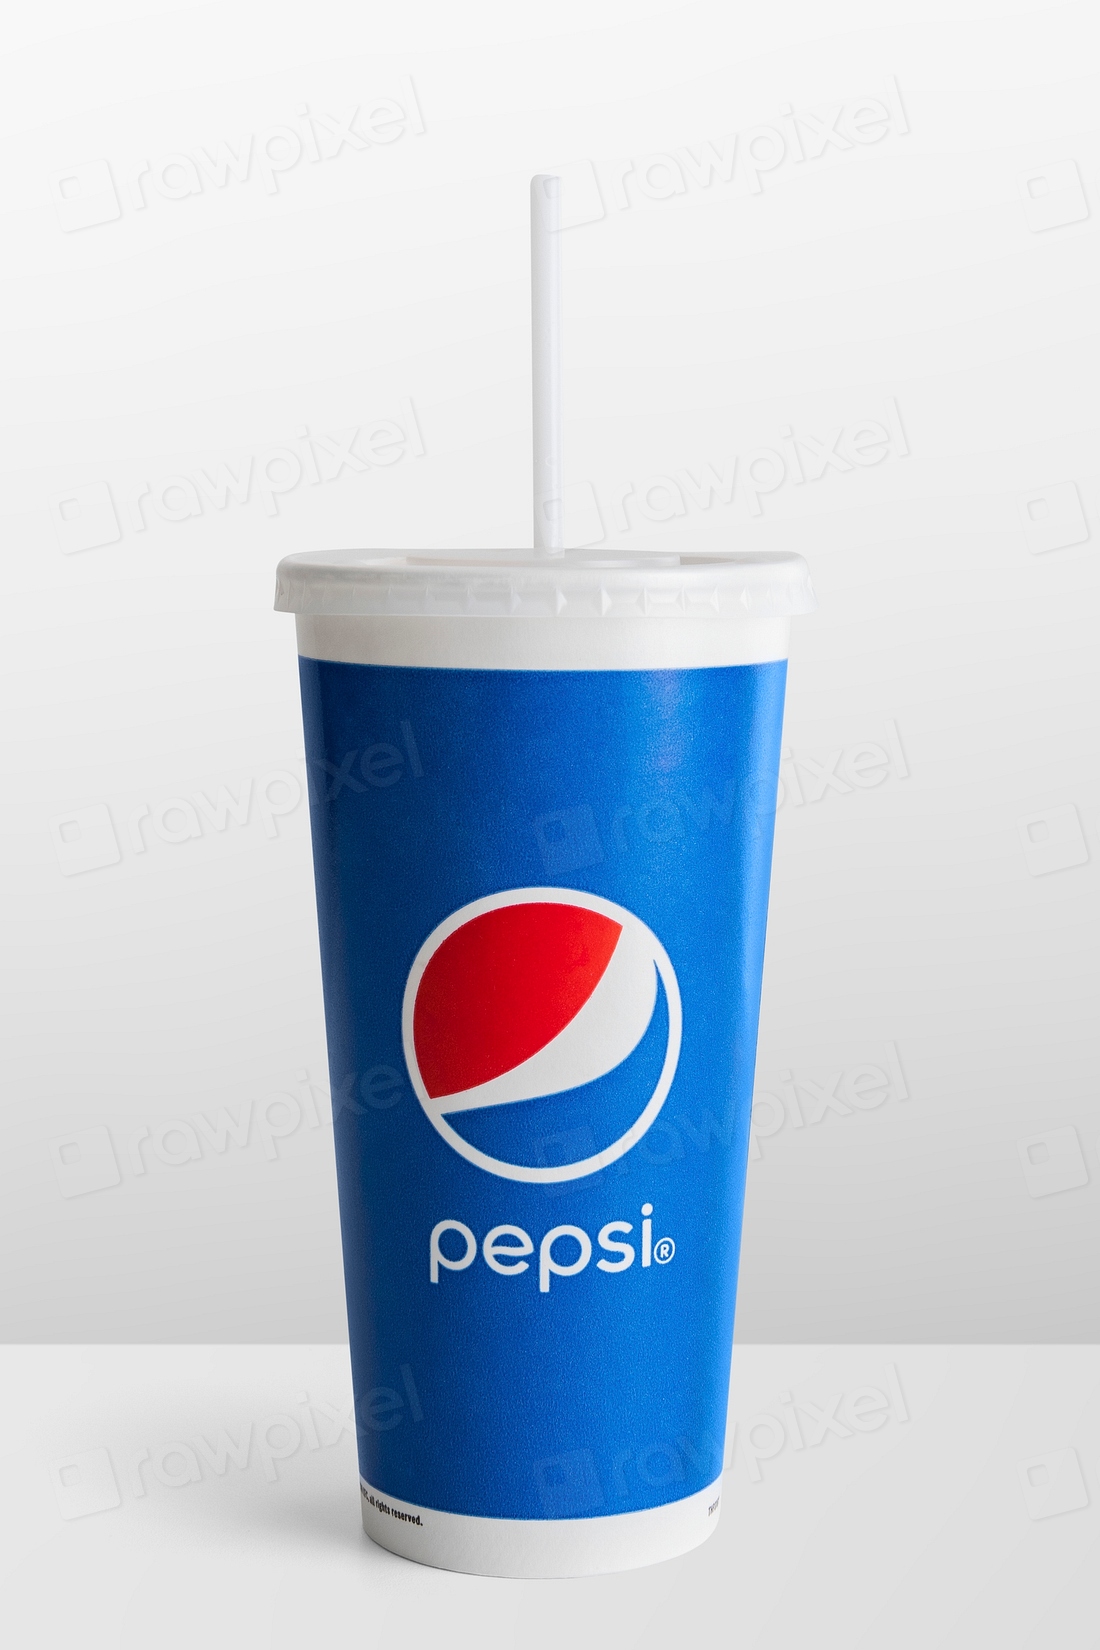 Beverage disposable cup Pepsi. JANUARY | Free PSD - rawpixel